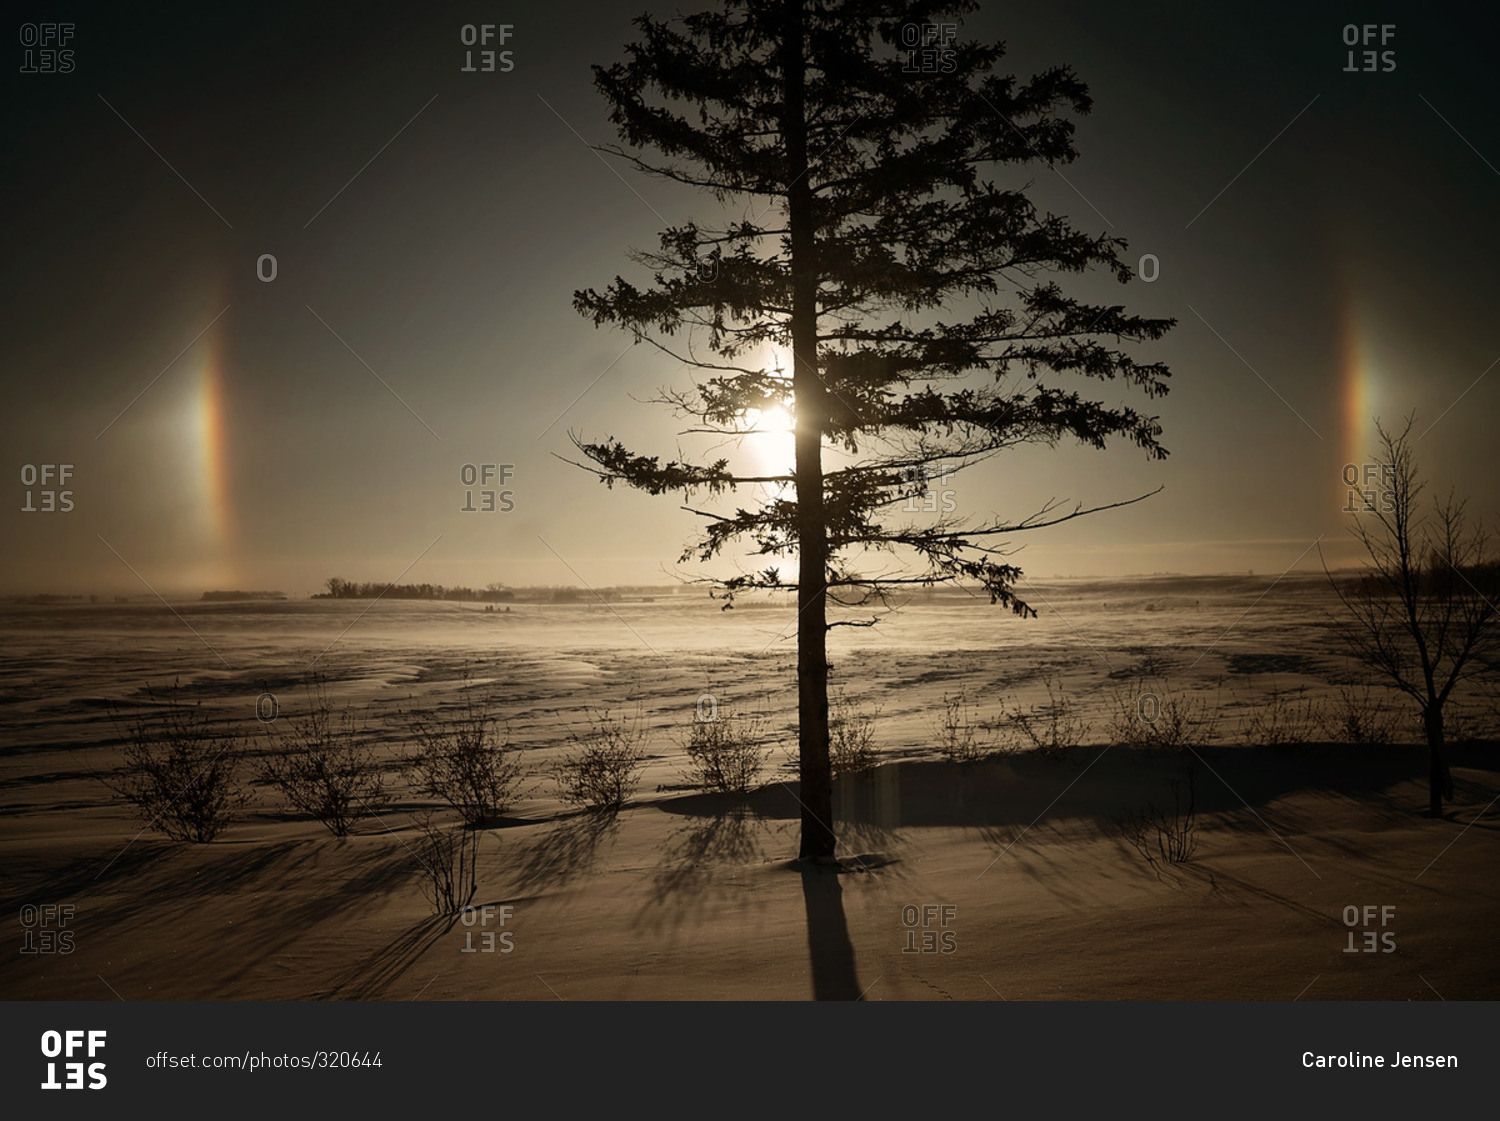 Sun dogs behind a tree in a snowy landscape